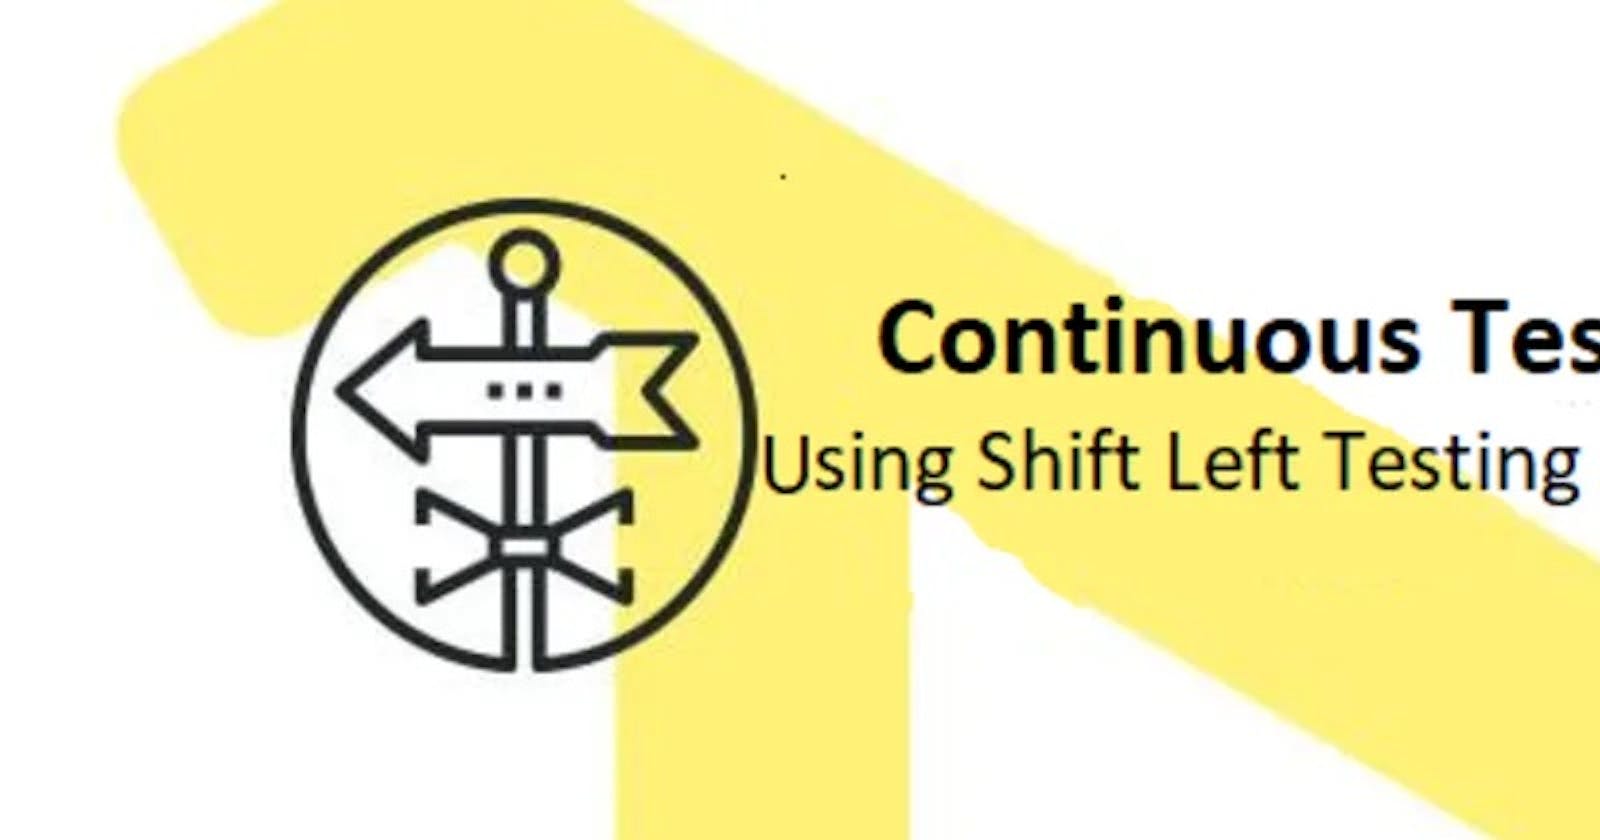 Continuous Testing Using Shift Left Testing Approach